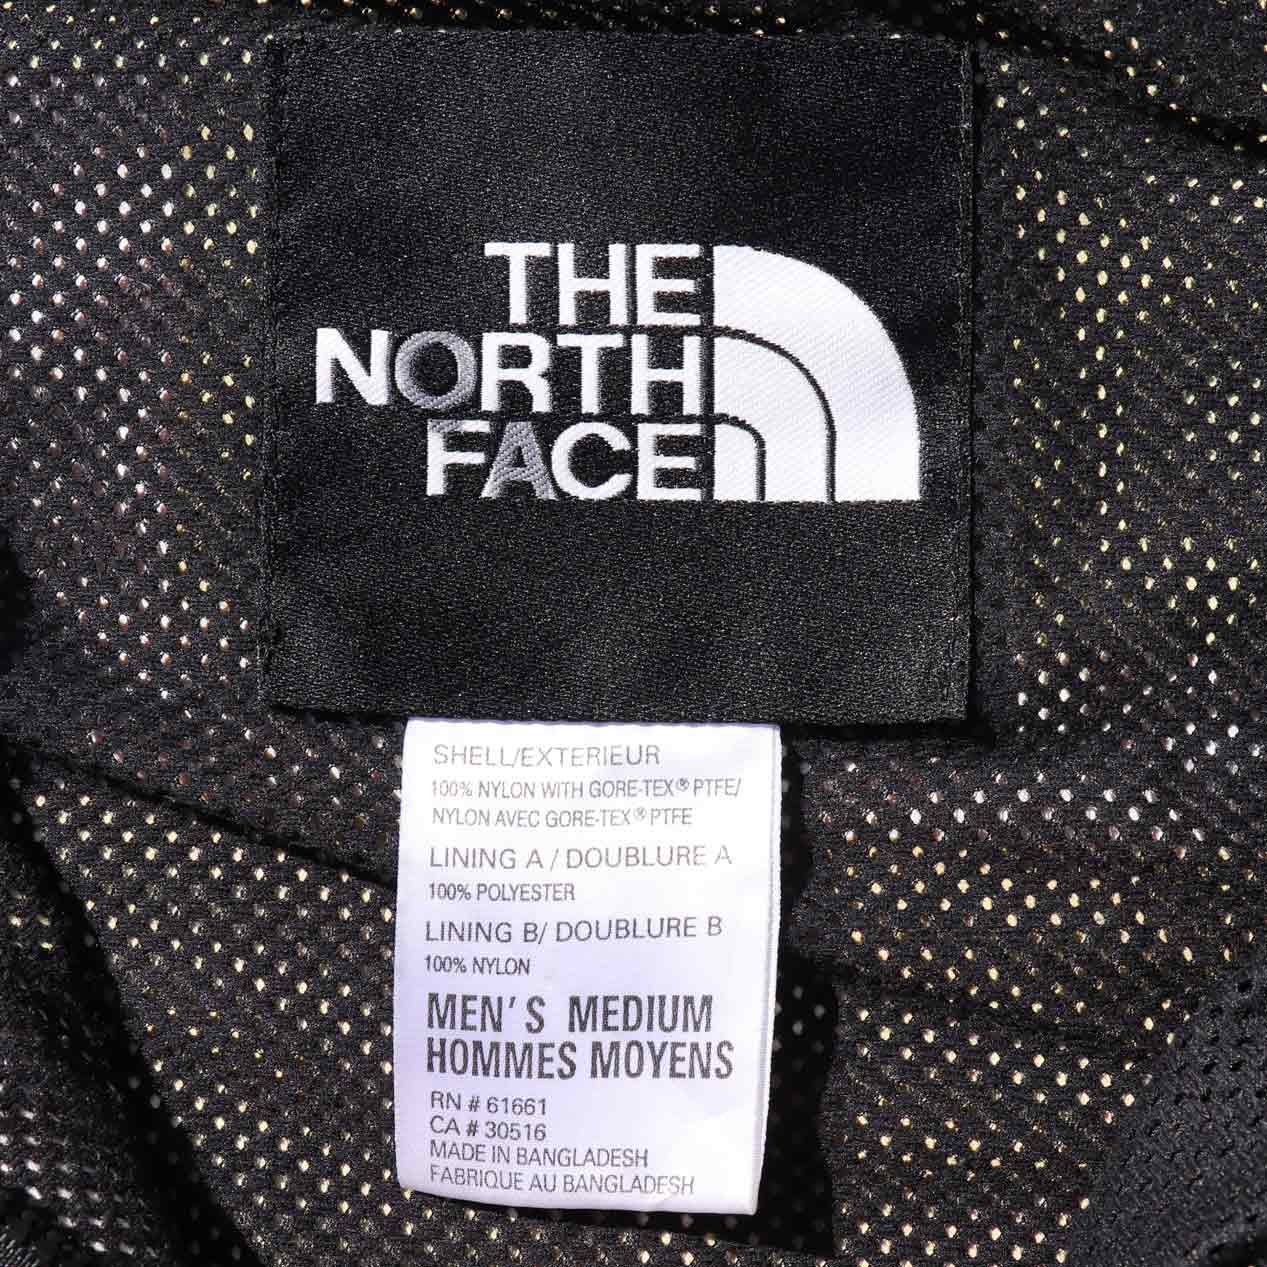 POST JUNK / 90's THE NORTH FACE GORE-TEX マウンテンライト